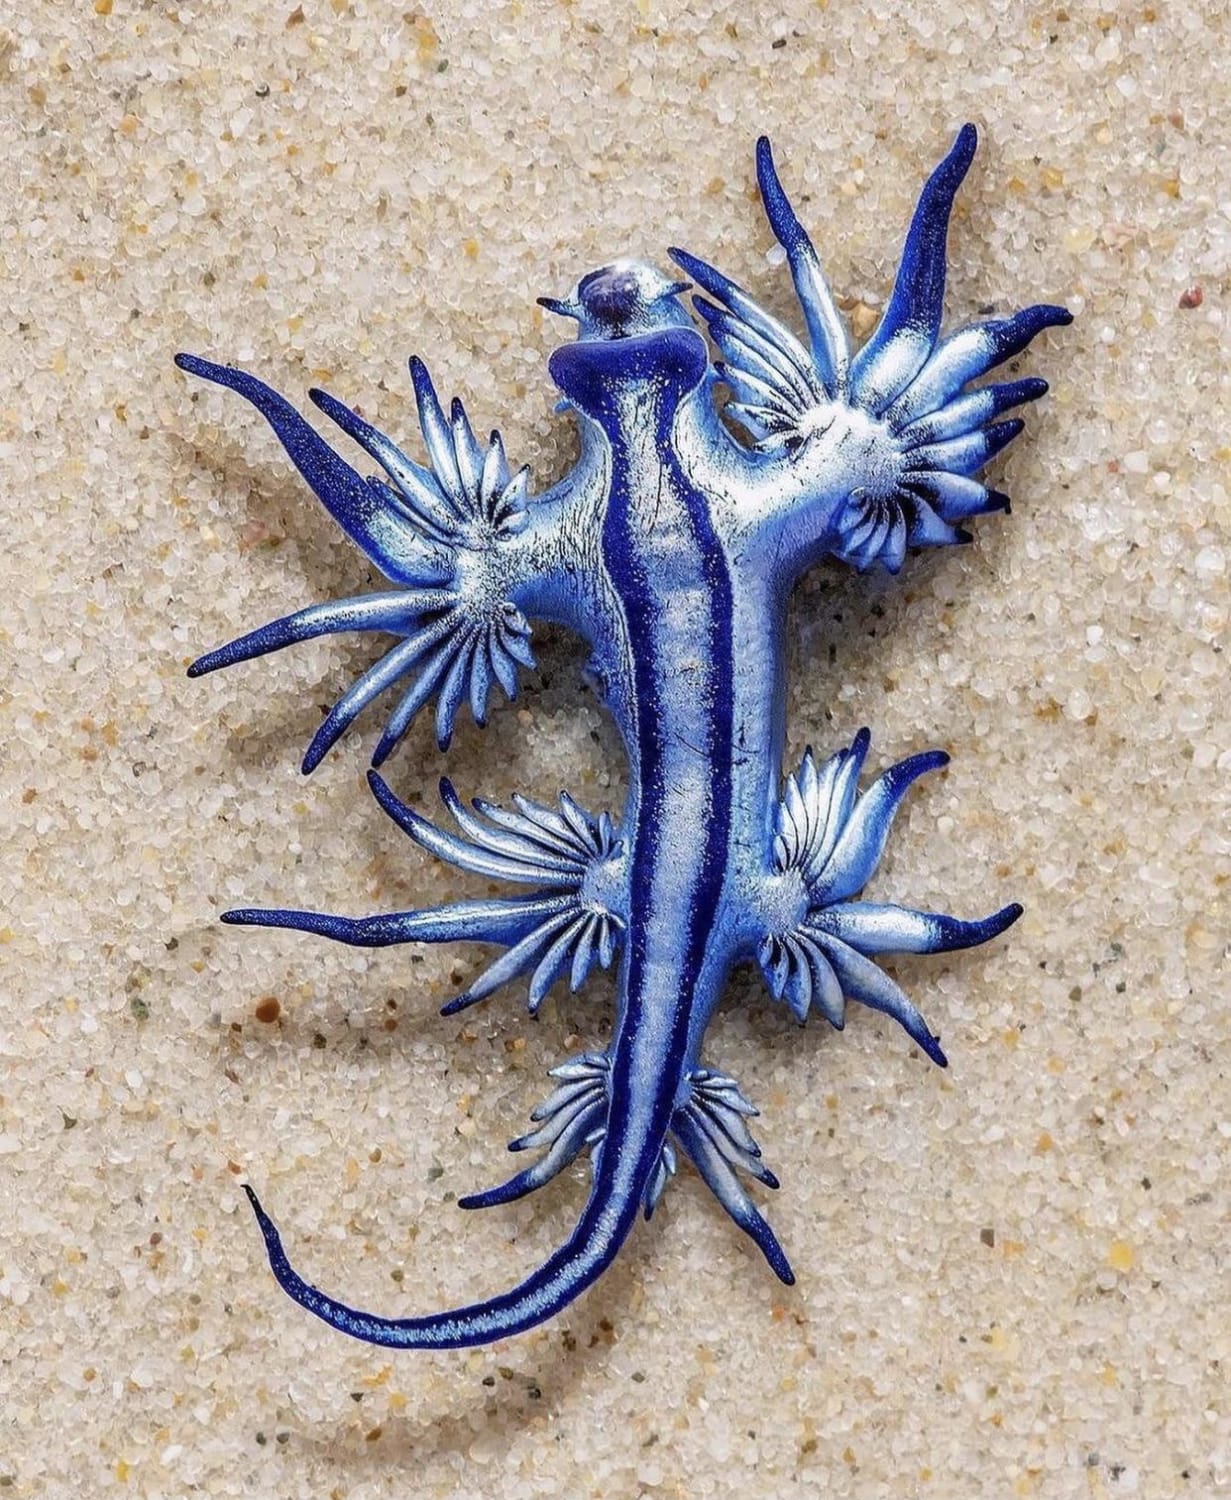 Blue Glaucus is a blue sea slug that eats Man O’ Wars and has a sting that can potentially kill a human.